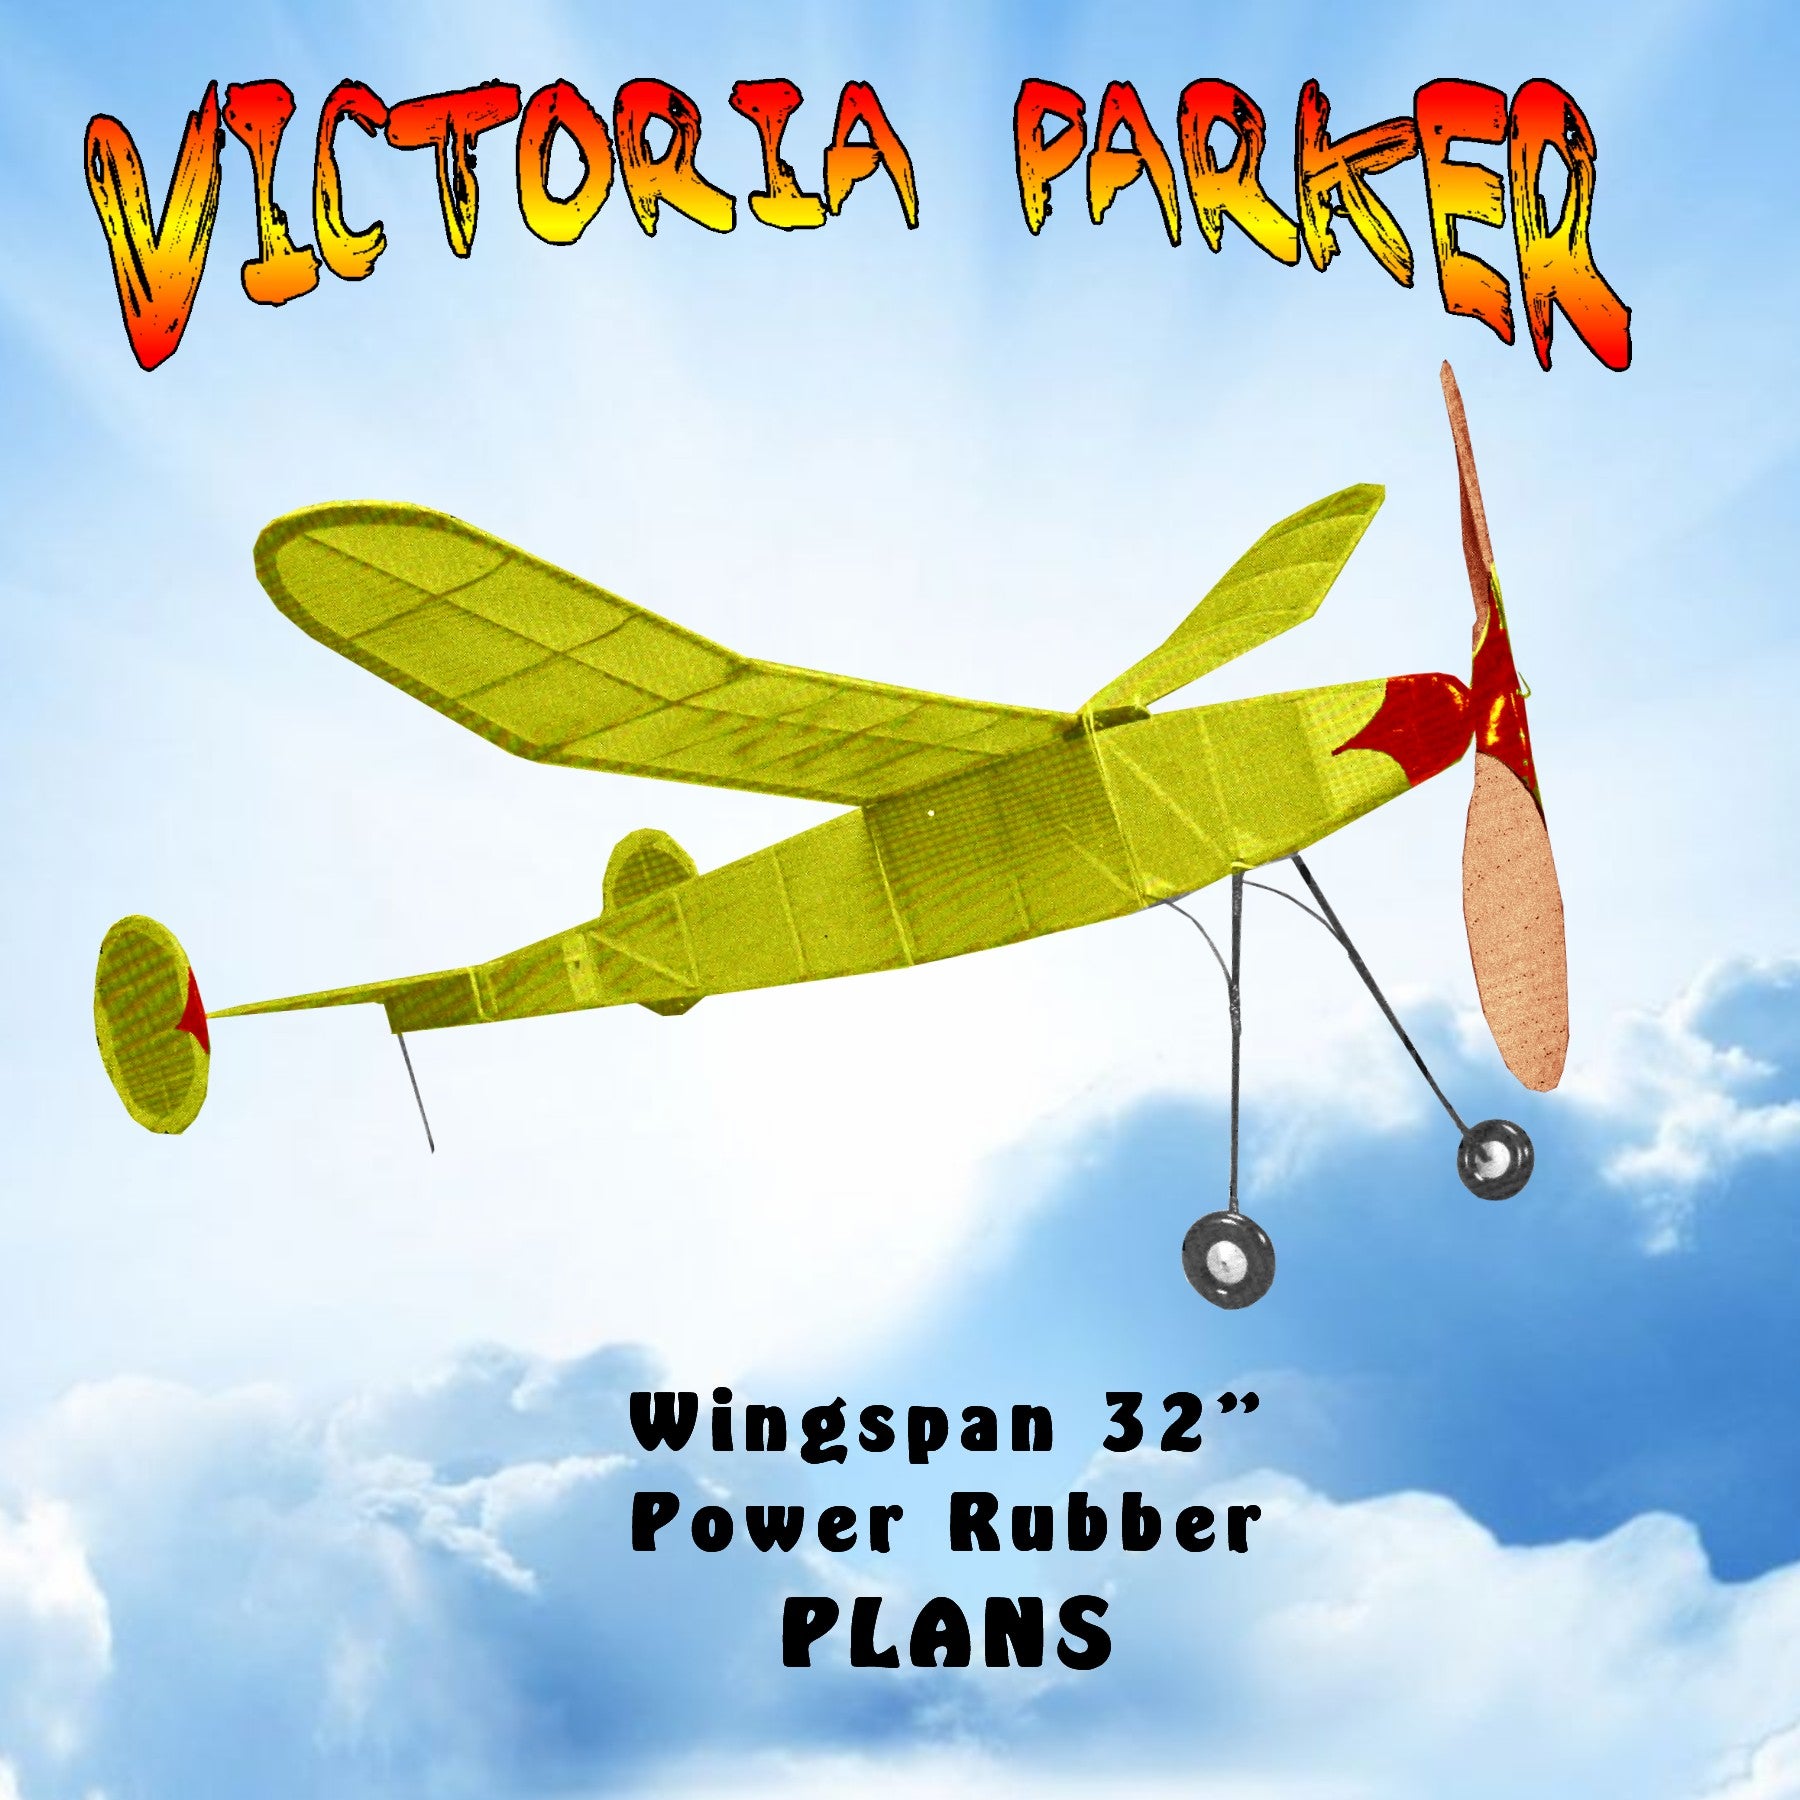 full size printed plan freeflight victoria parker wingspan 32”  power rubber